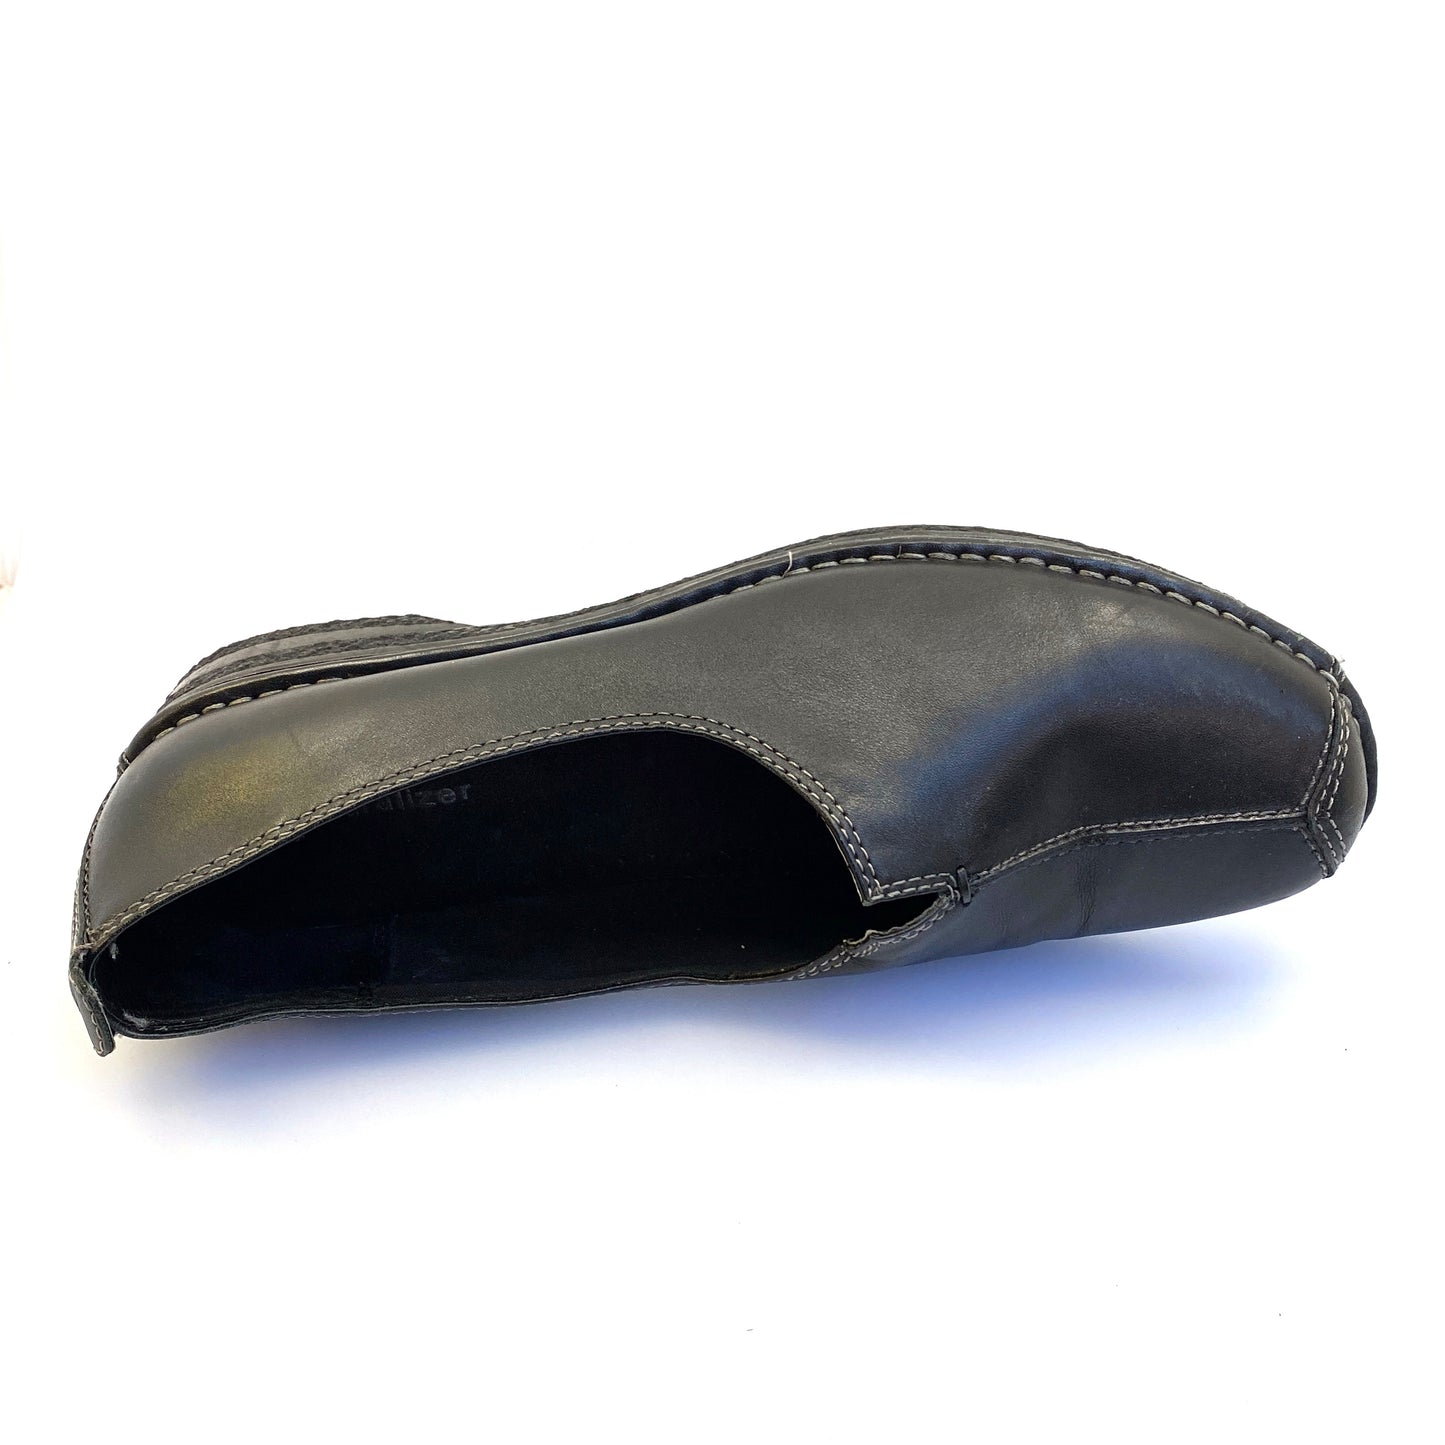 Comfortable Naturalizer Womens Leather Flats - Size 10W - Black - Very Good